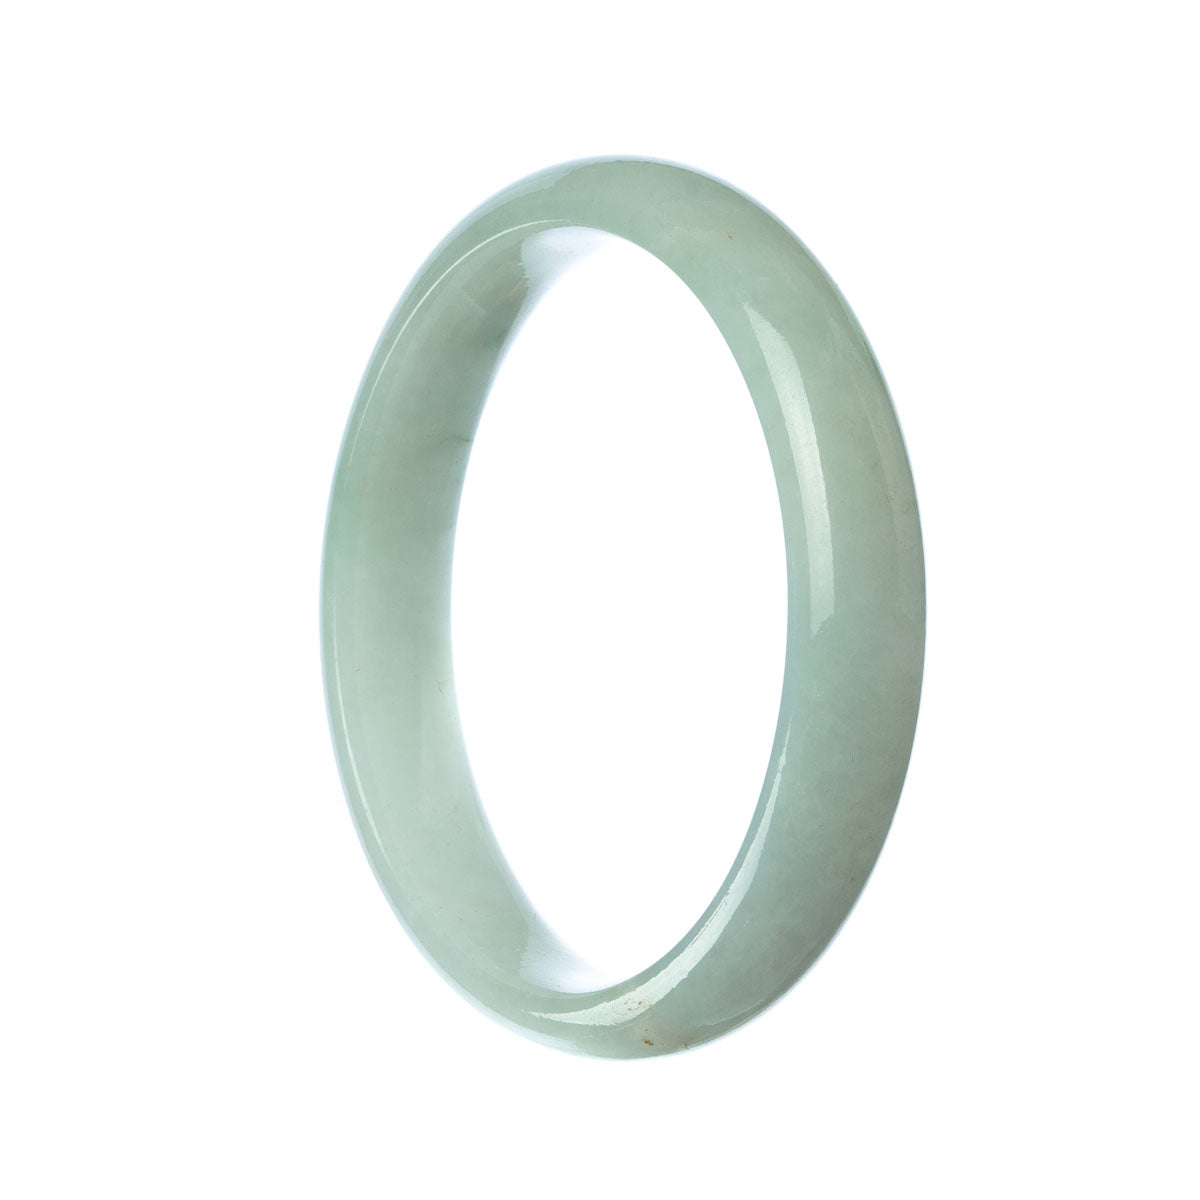 A half-moon shaped pale green Burma Jade bracelet, with a genuine Grade A quality. The bracelet measures 58mm in size. Designed and crafted by MAYS.